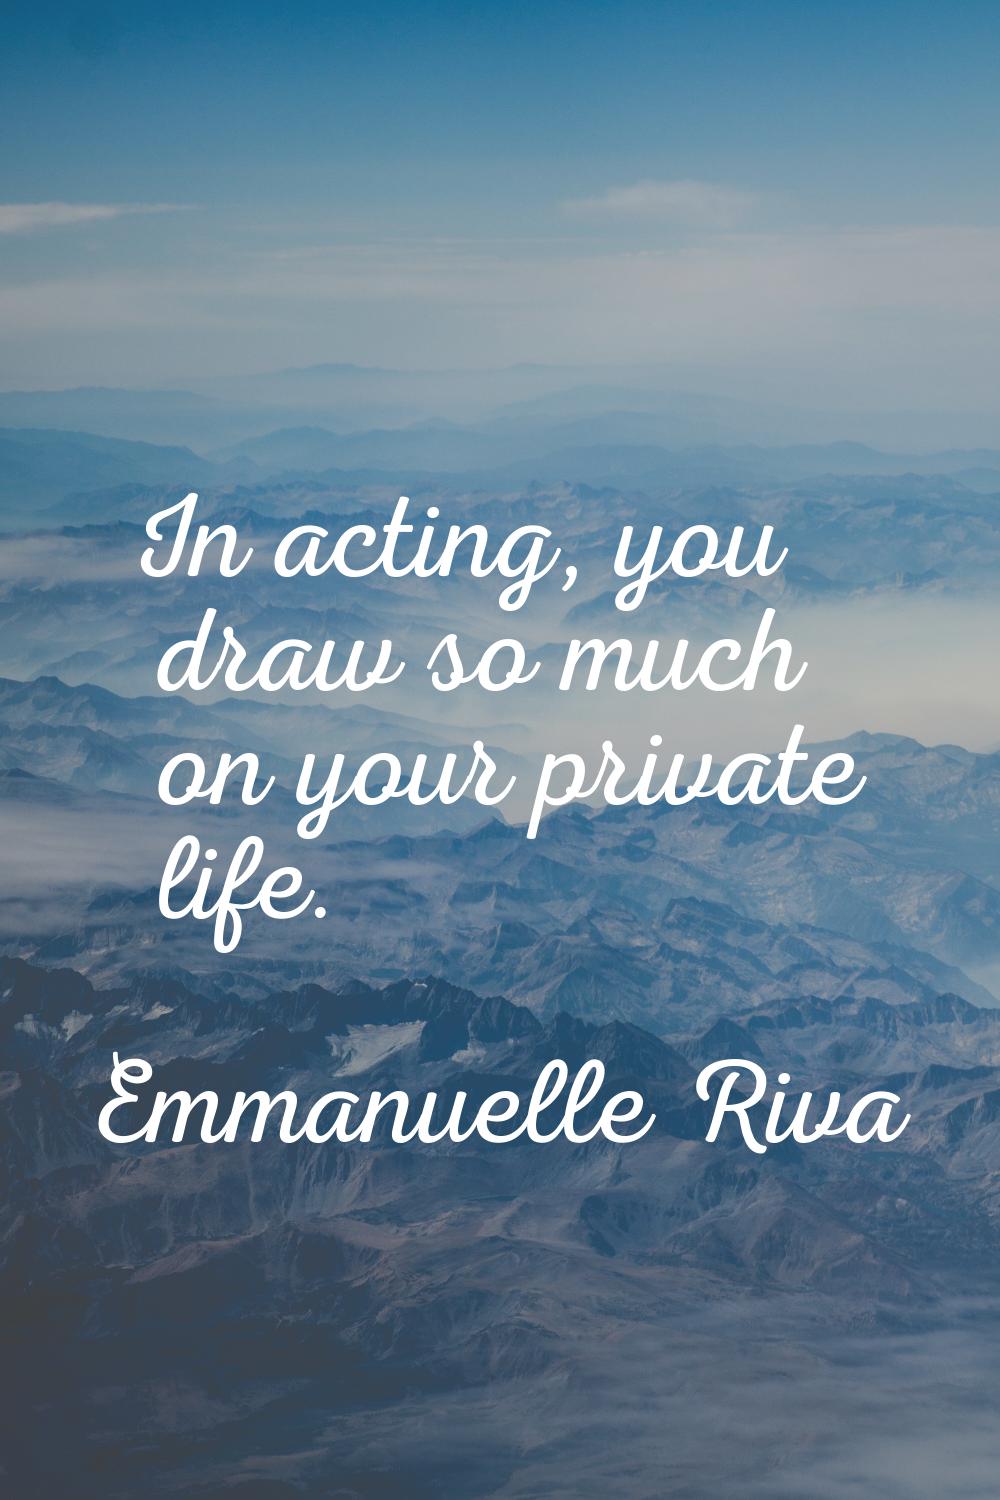 In acting, you draw so much on your private life.